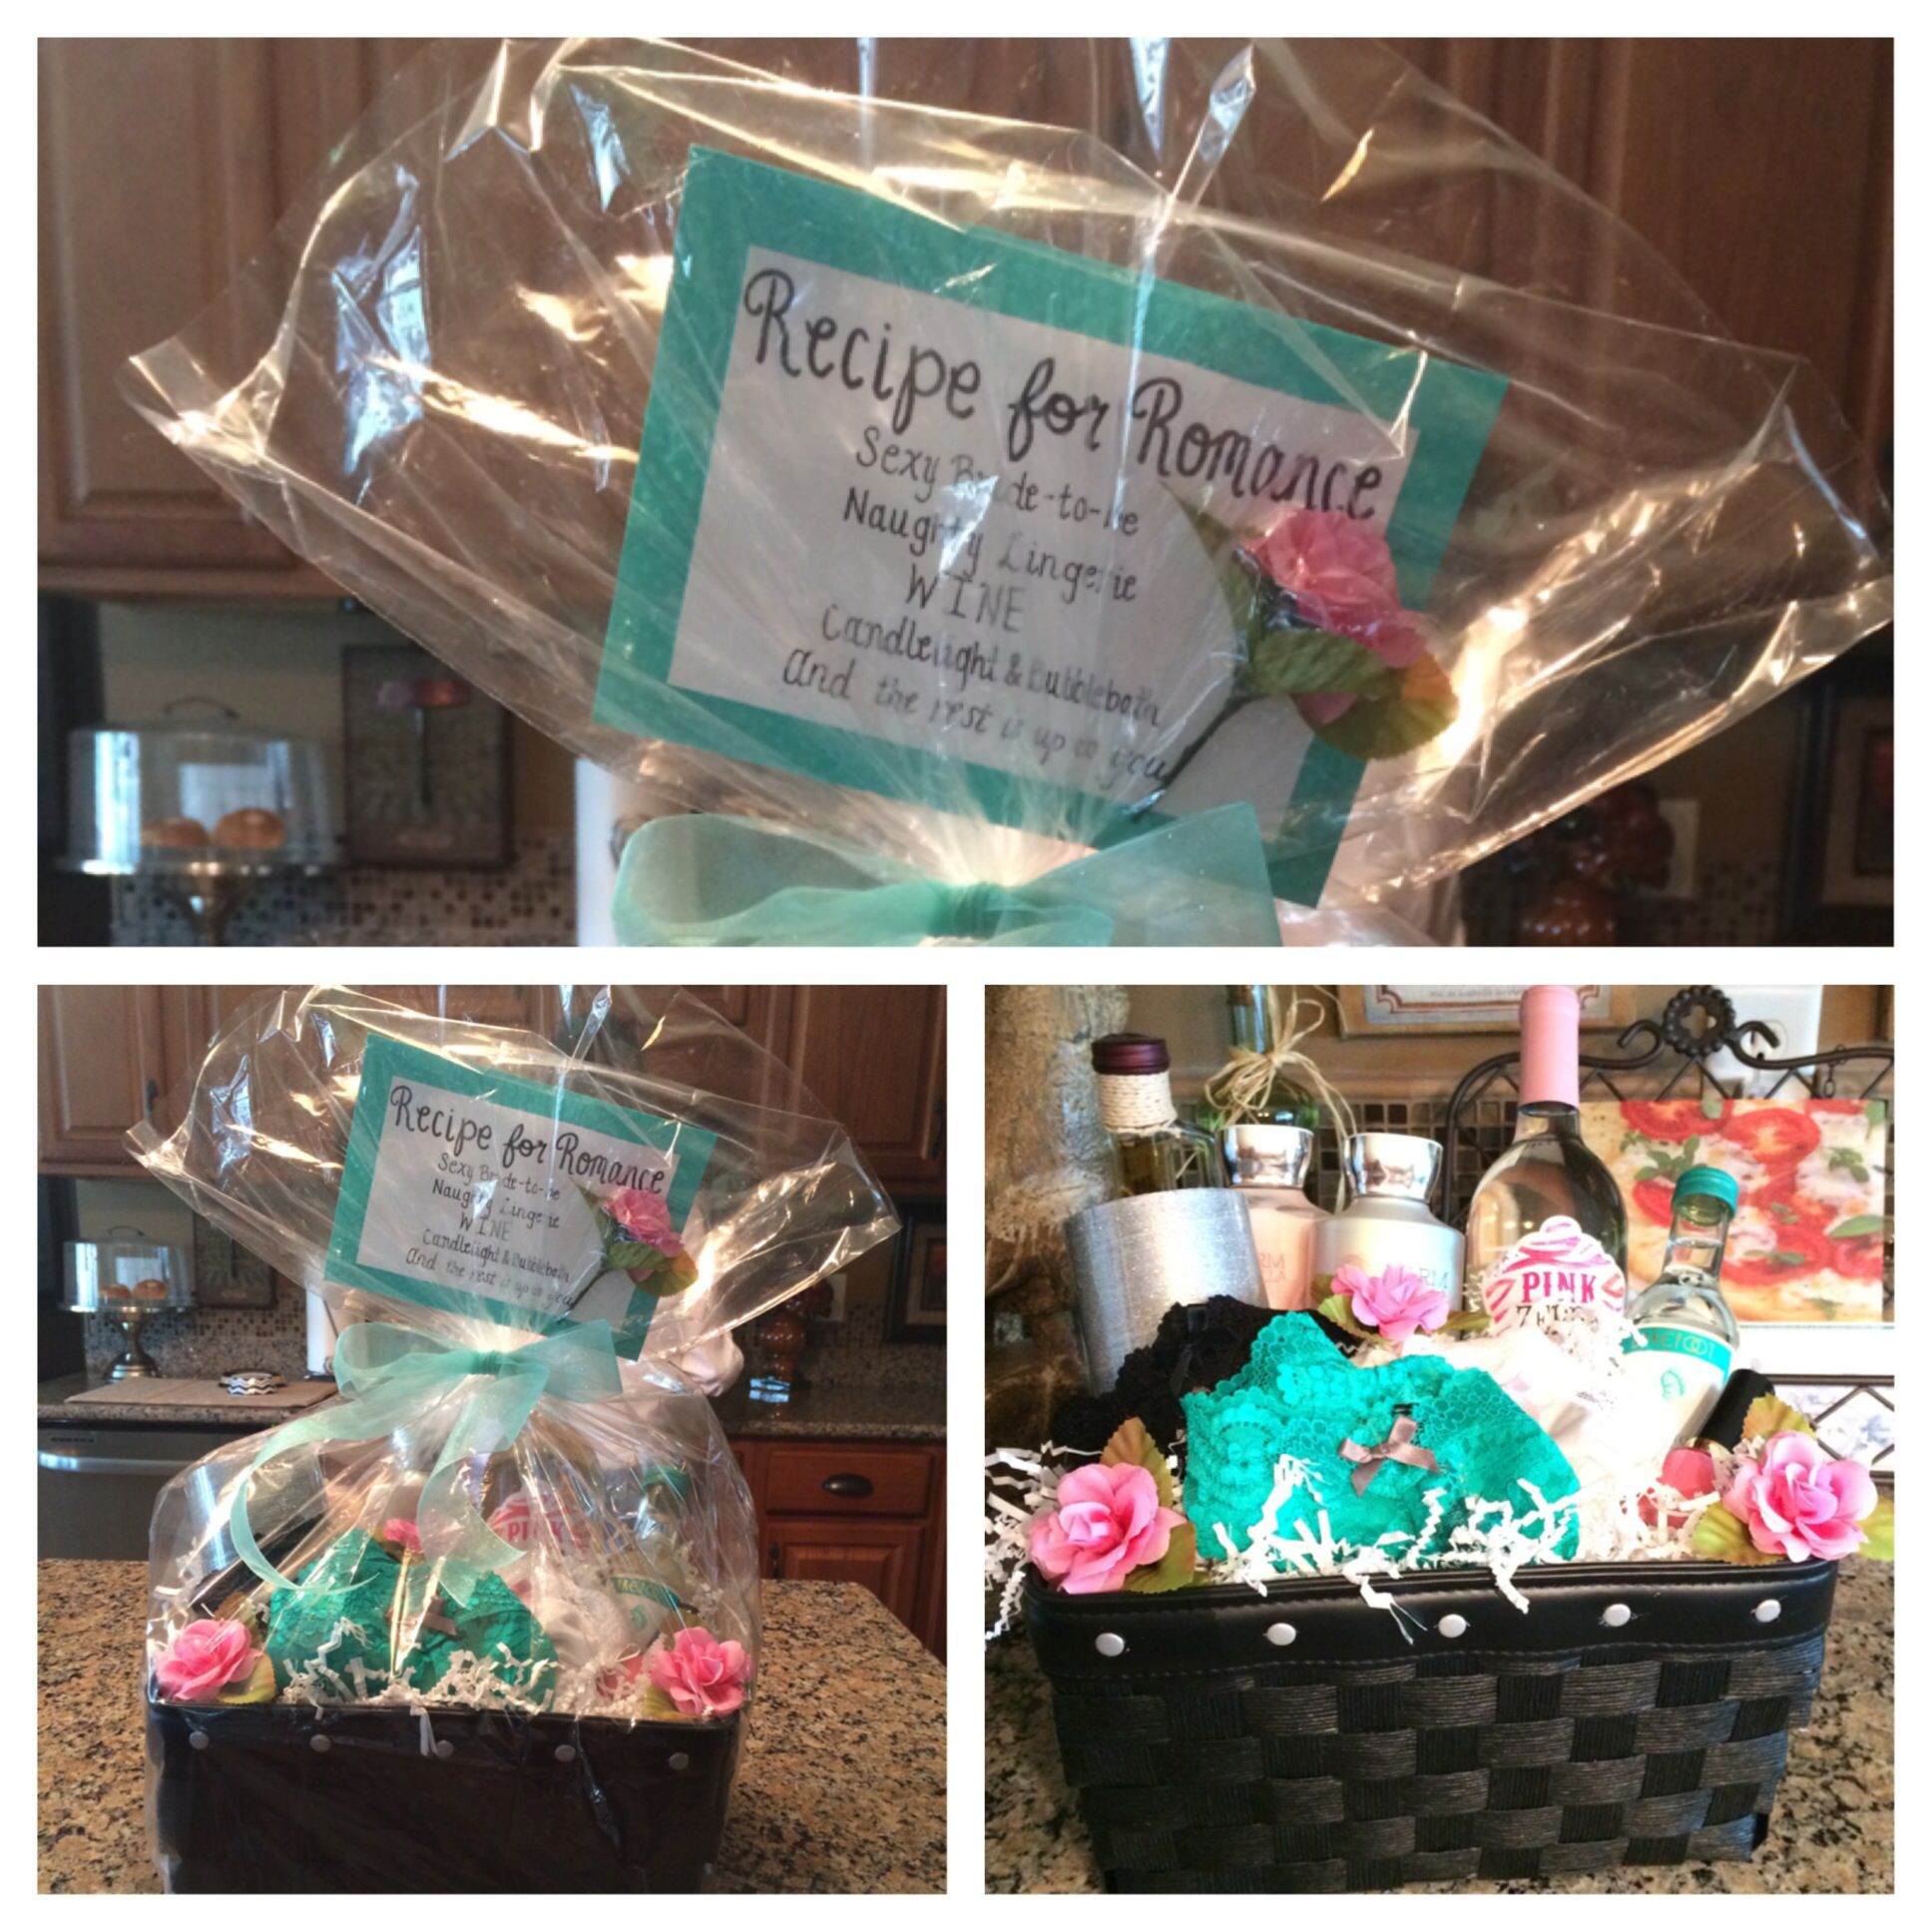 Bachelorette Gift Baskets Ideas
 Bachelorette t basket with bubble bath wine and other